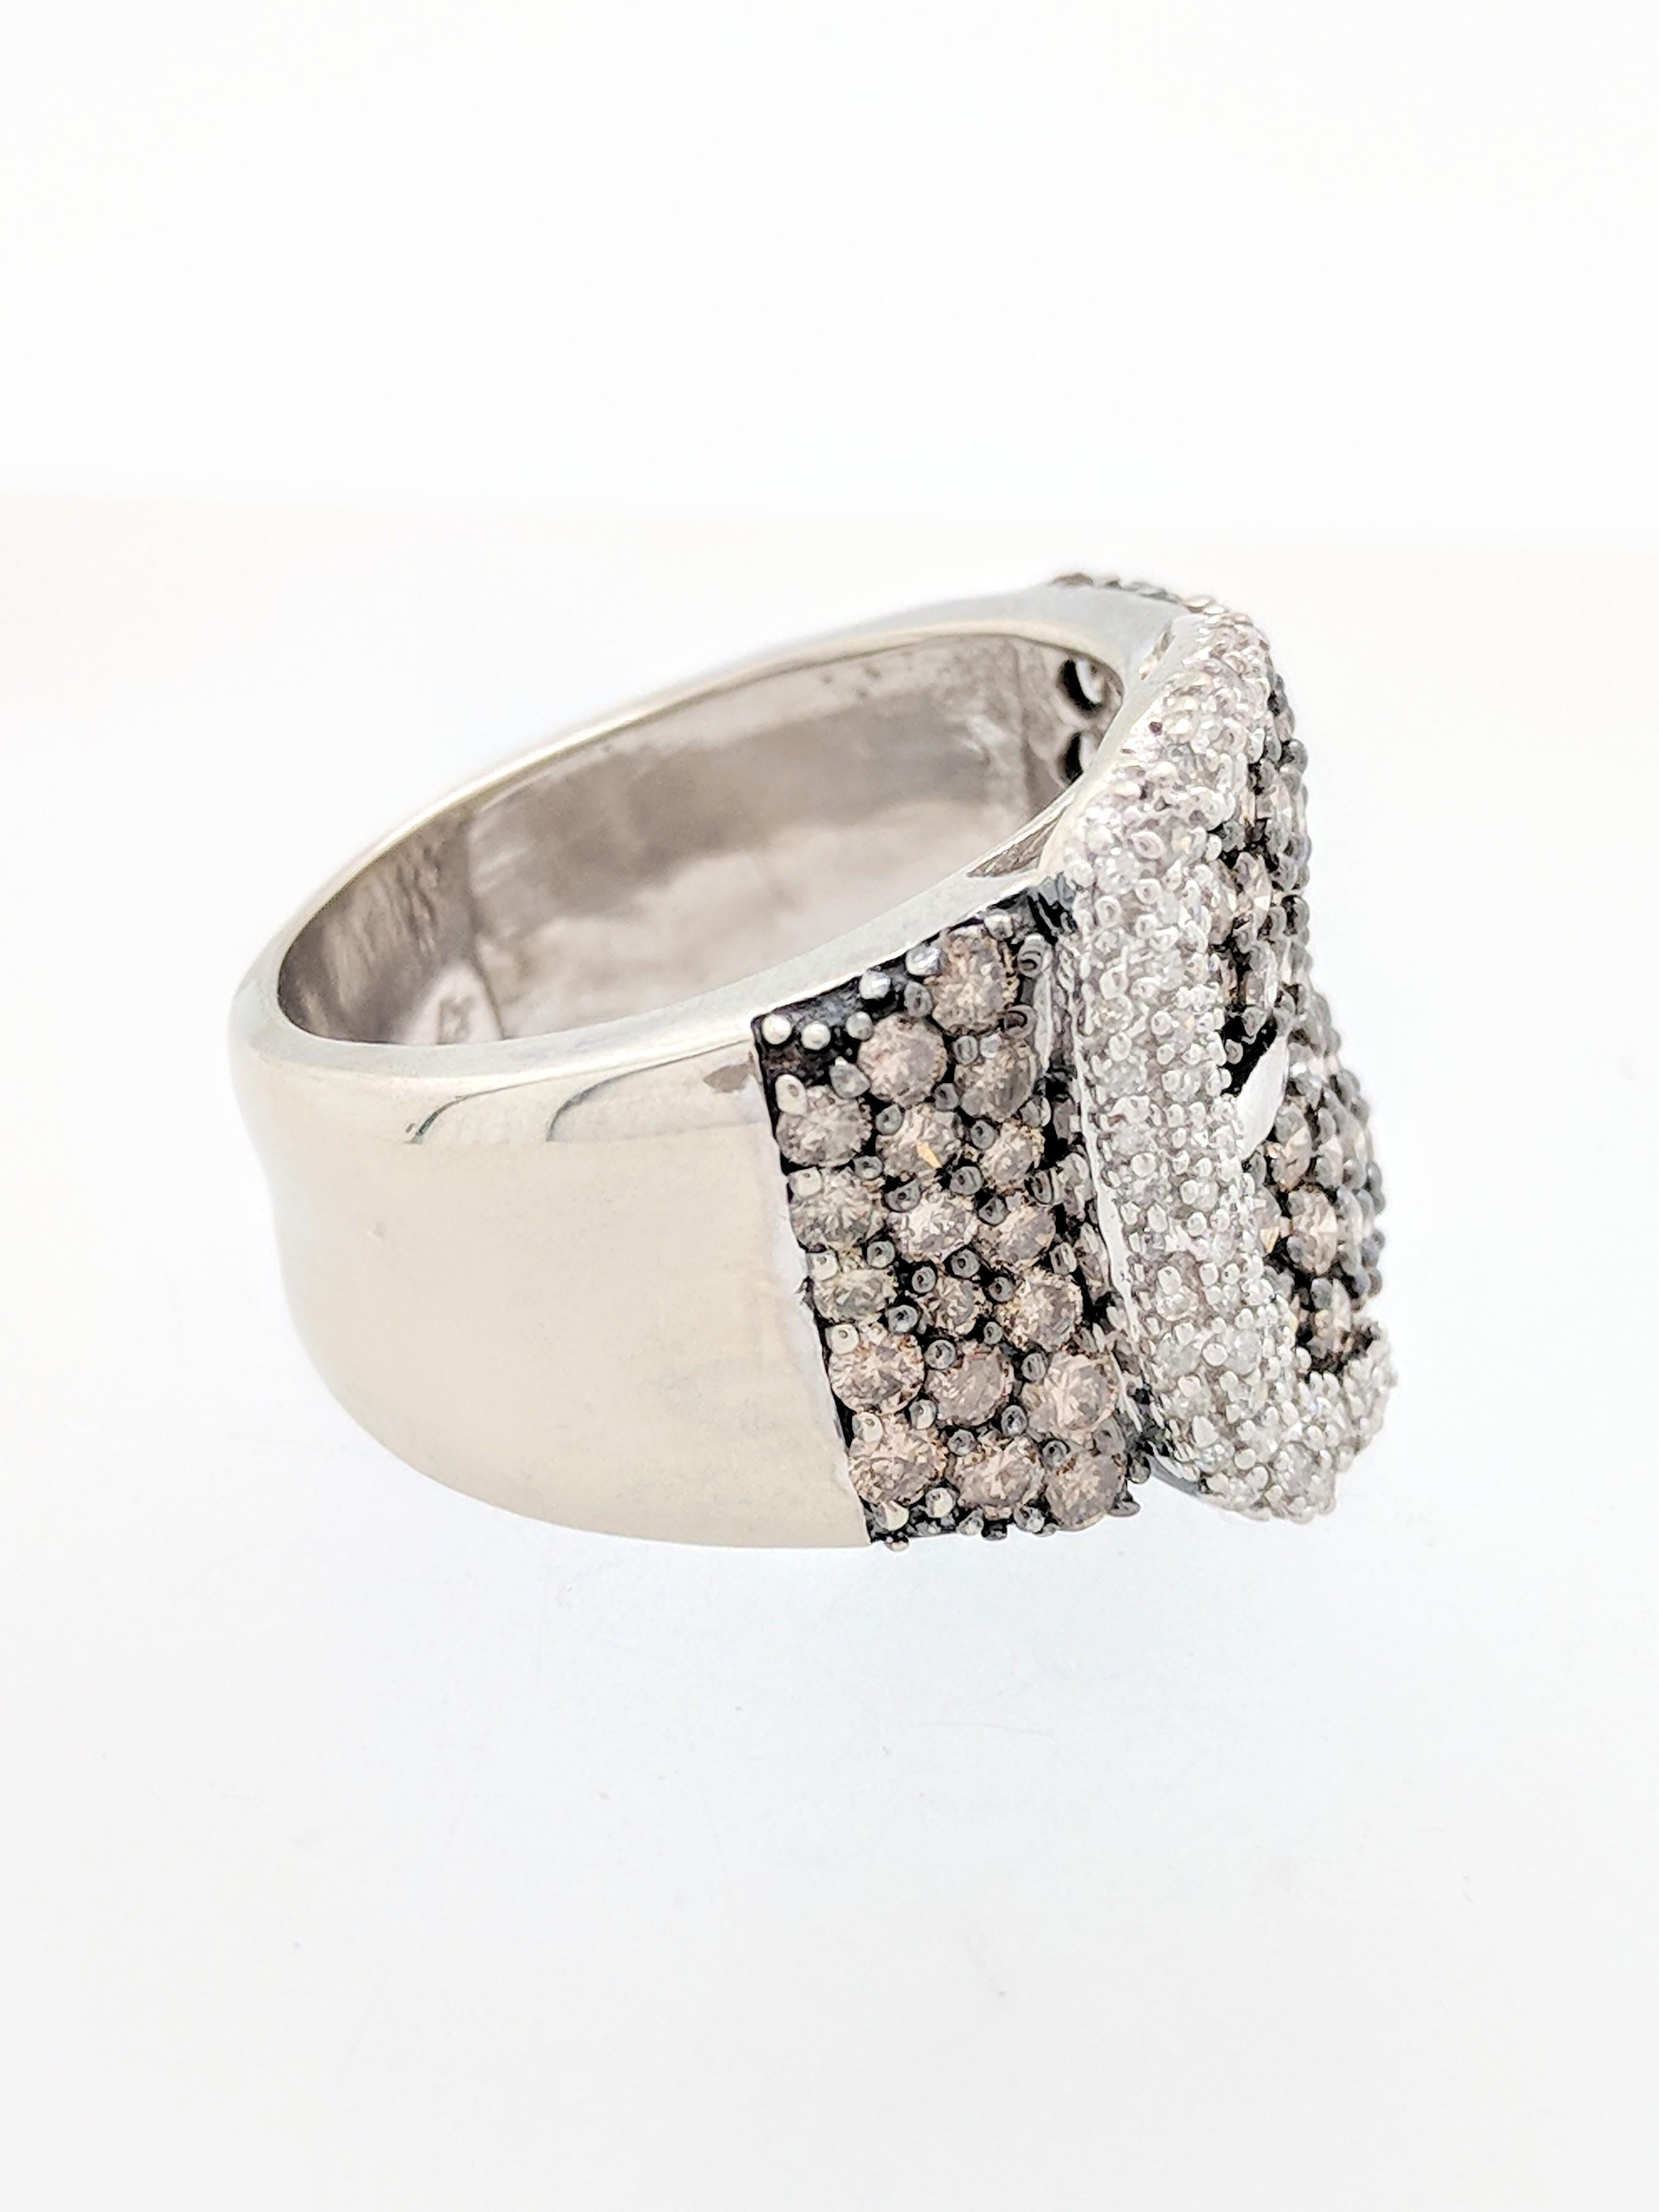 10 Karat White Gold 1.45 Carat White and Champagne Pave Diamond Buckle Ring 1